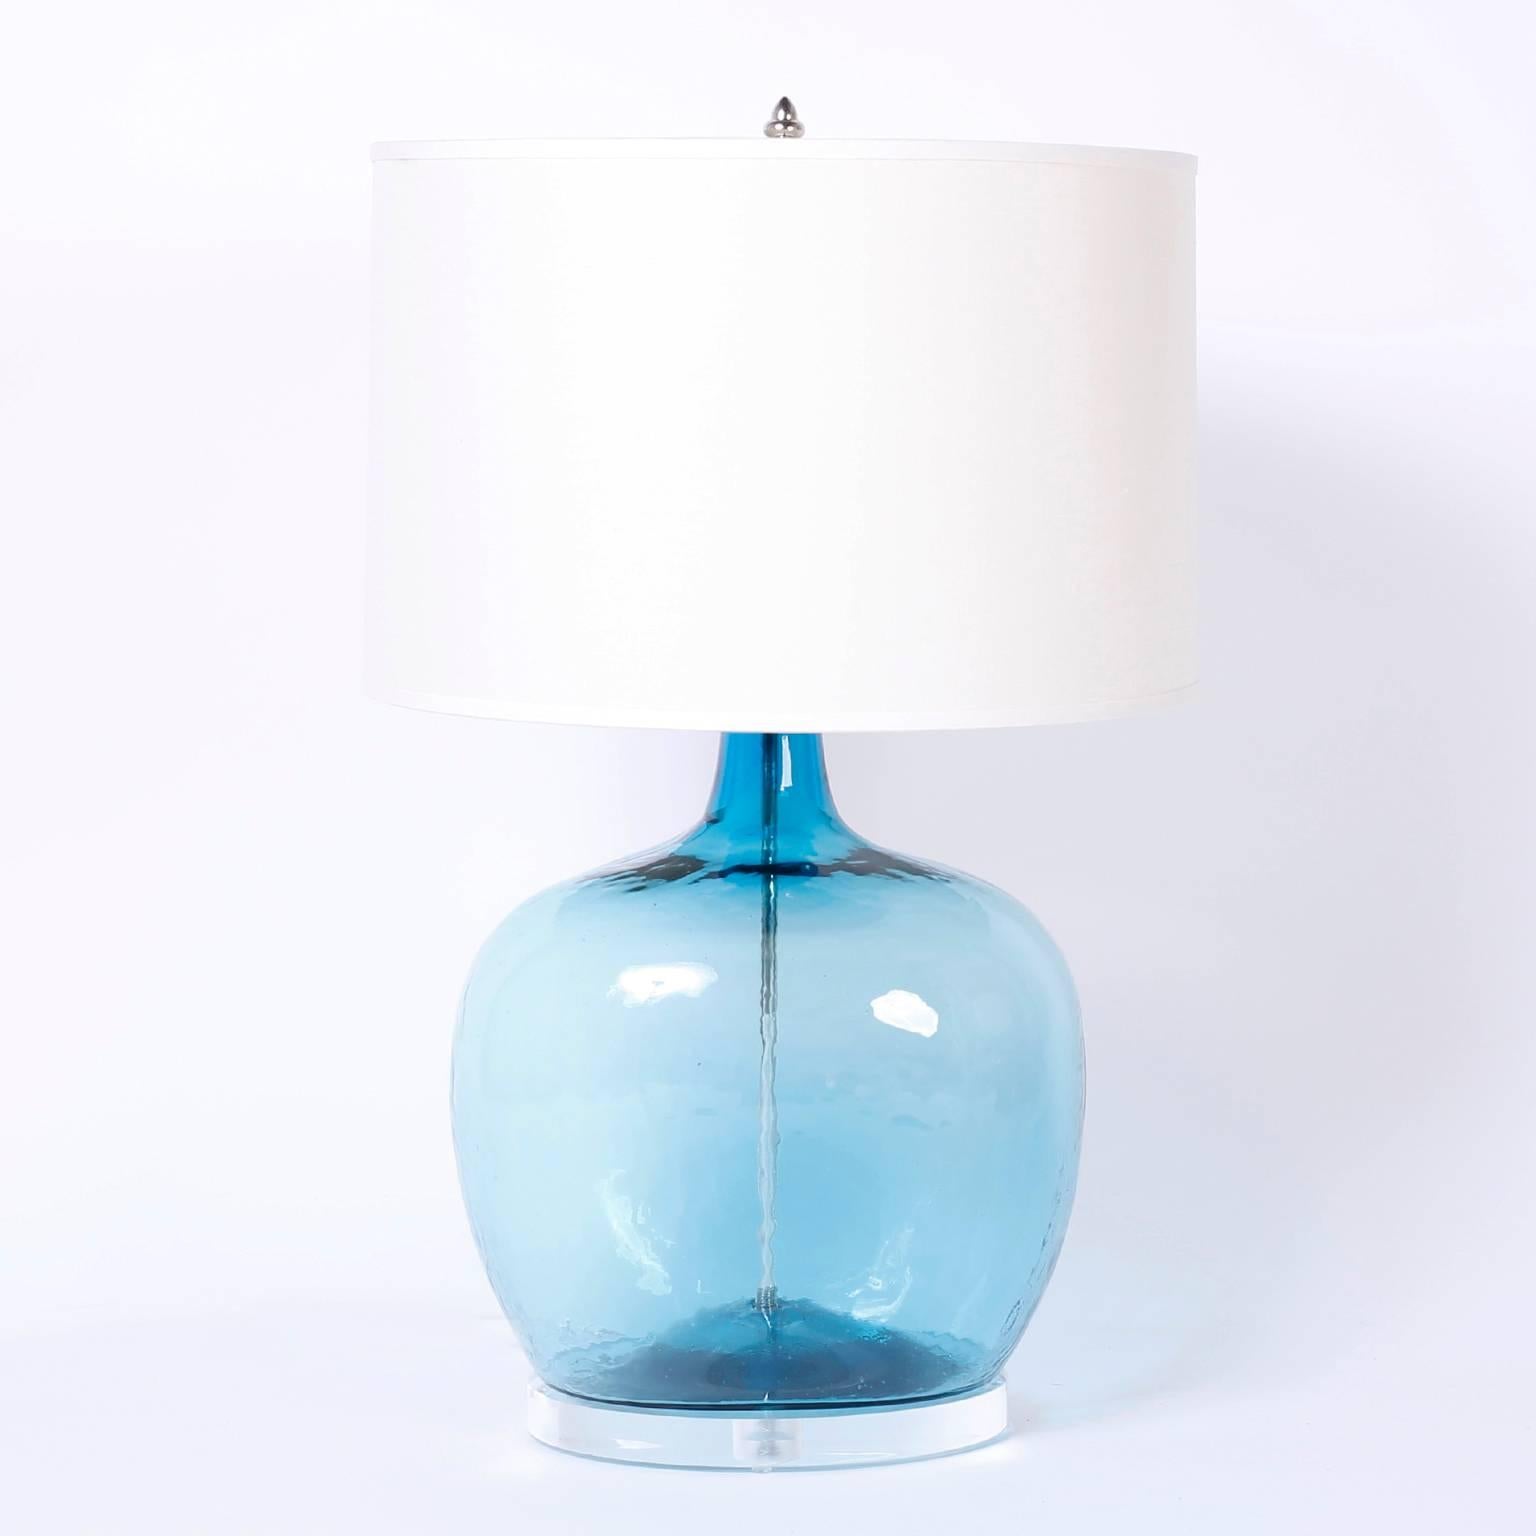 Pair of table lamps custom designed and made by F.S. Henemader. Created with alluring handblown blue glass bottles on Lucite stands.